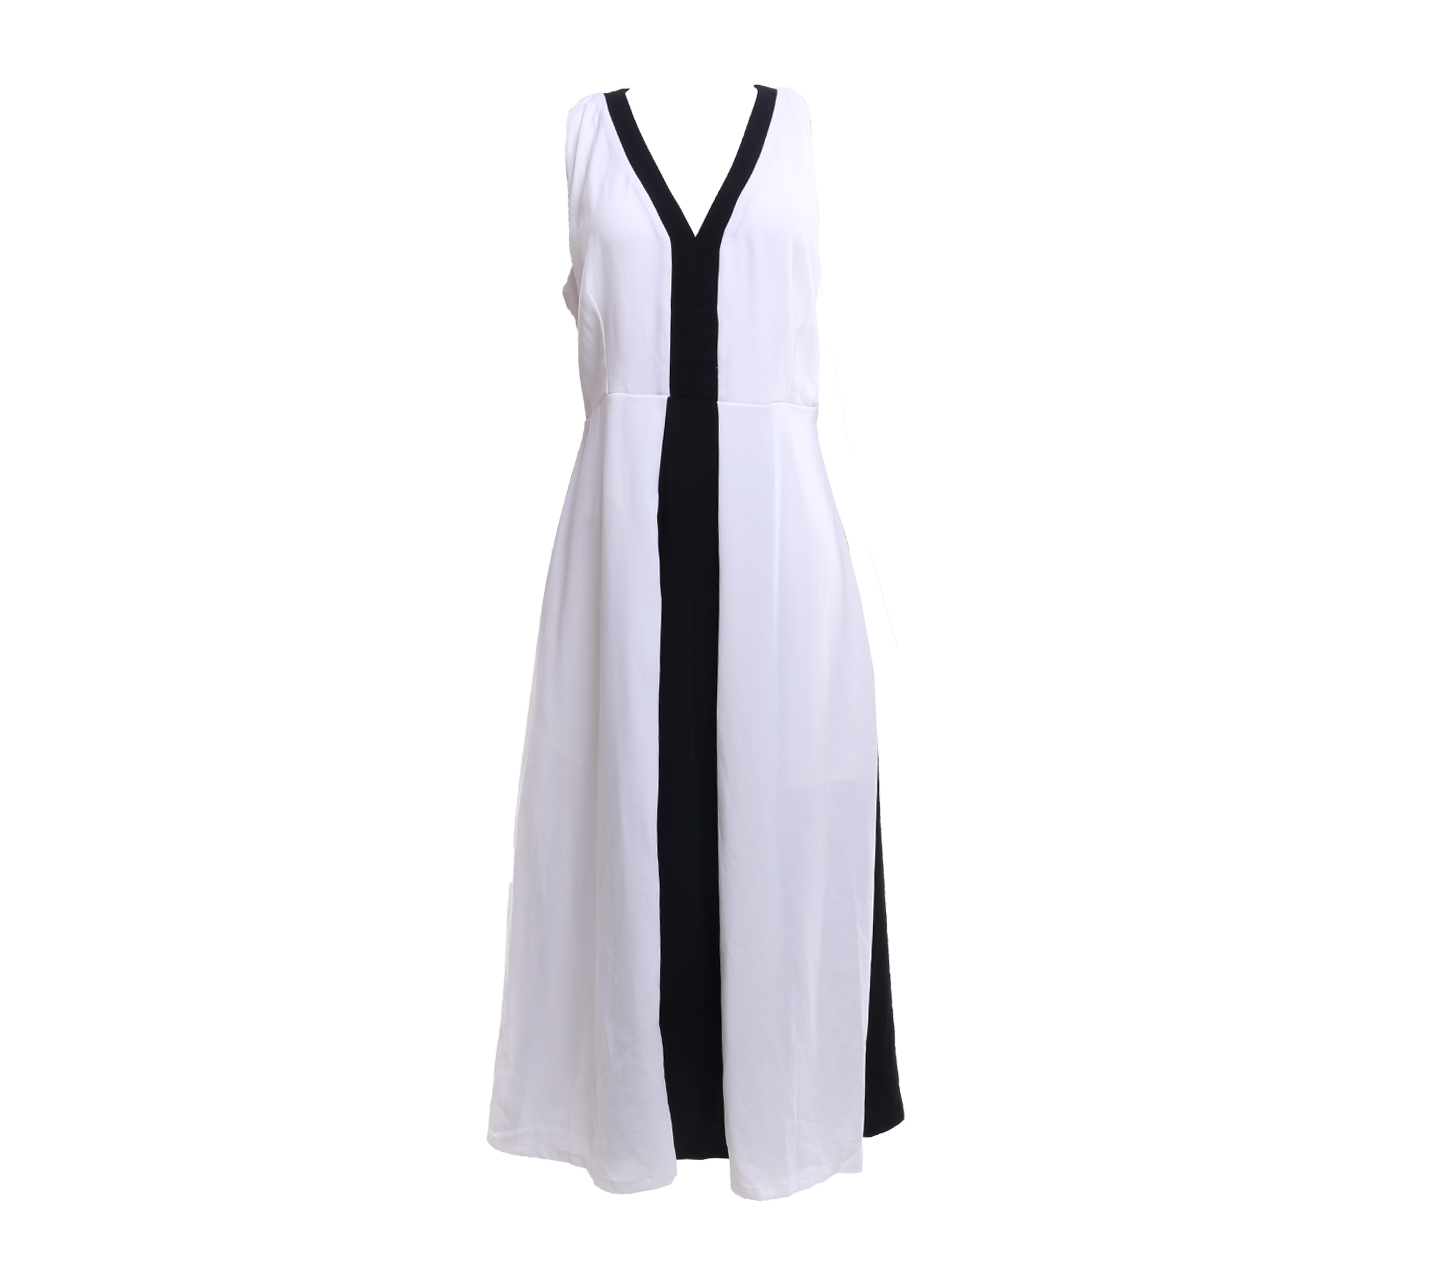 Cocoon Black And White Long Dress